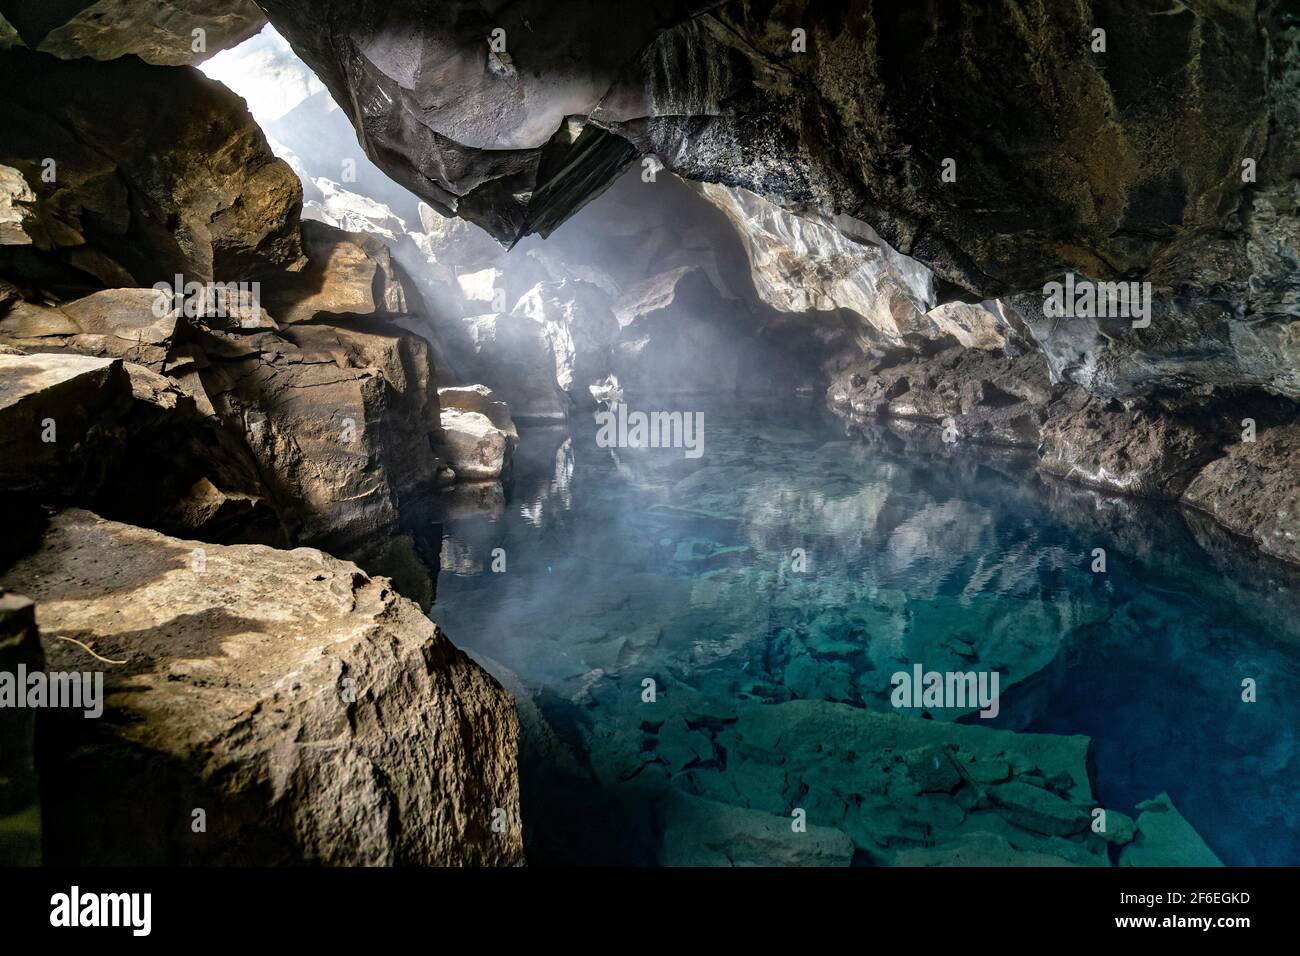 Grjótagjá cave, Iceland. 22nd May, 2015. Grjotagja, small lava cave near lake Myvatn with thermal spring inside, in northern Iceland. Stock Photo